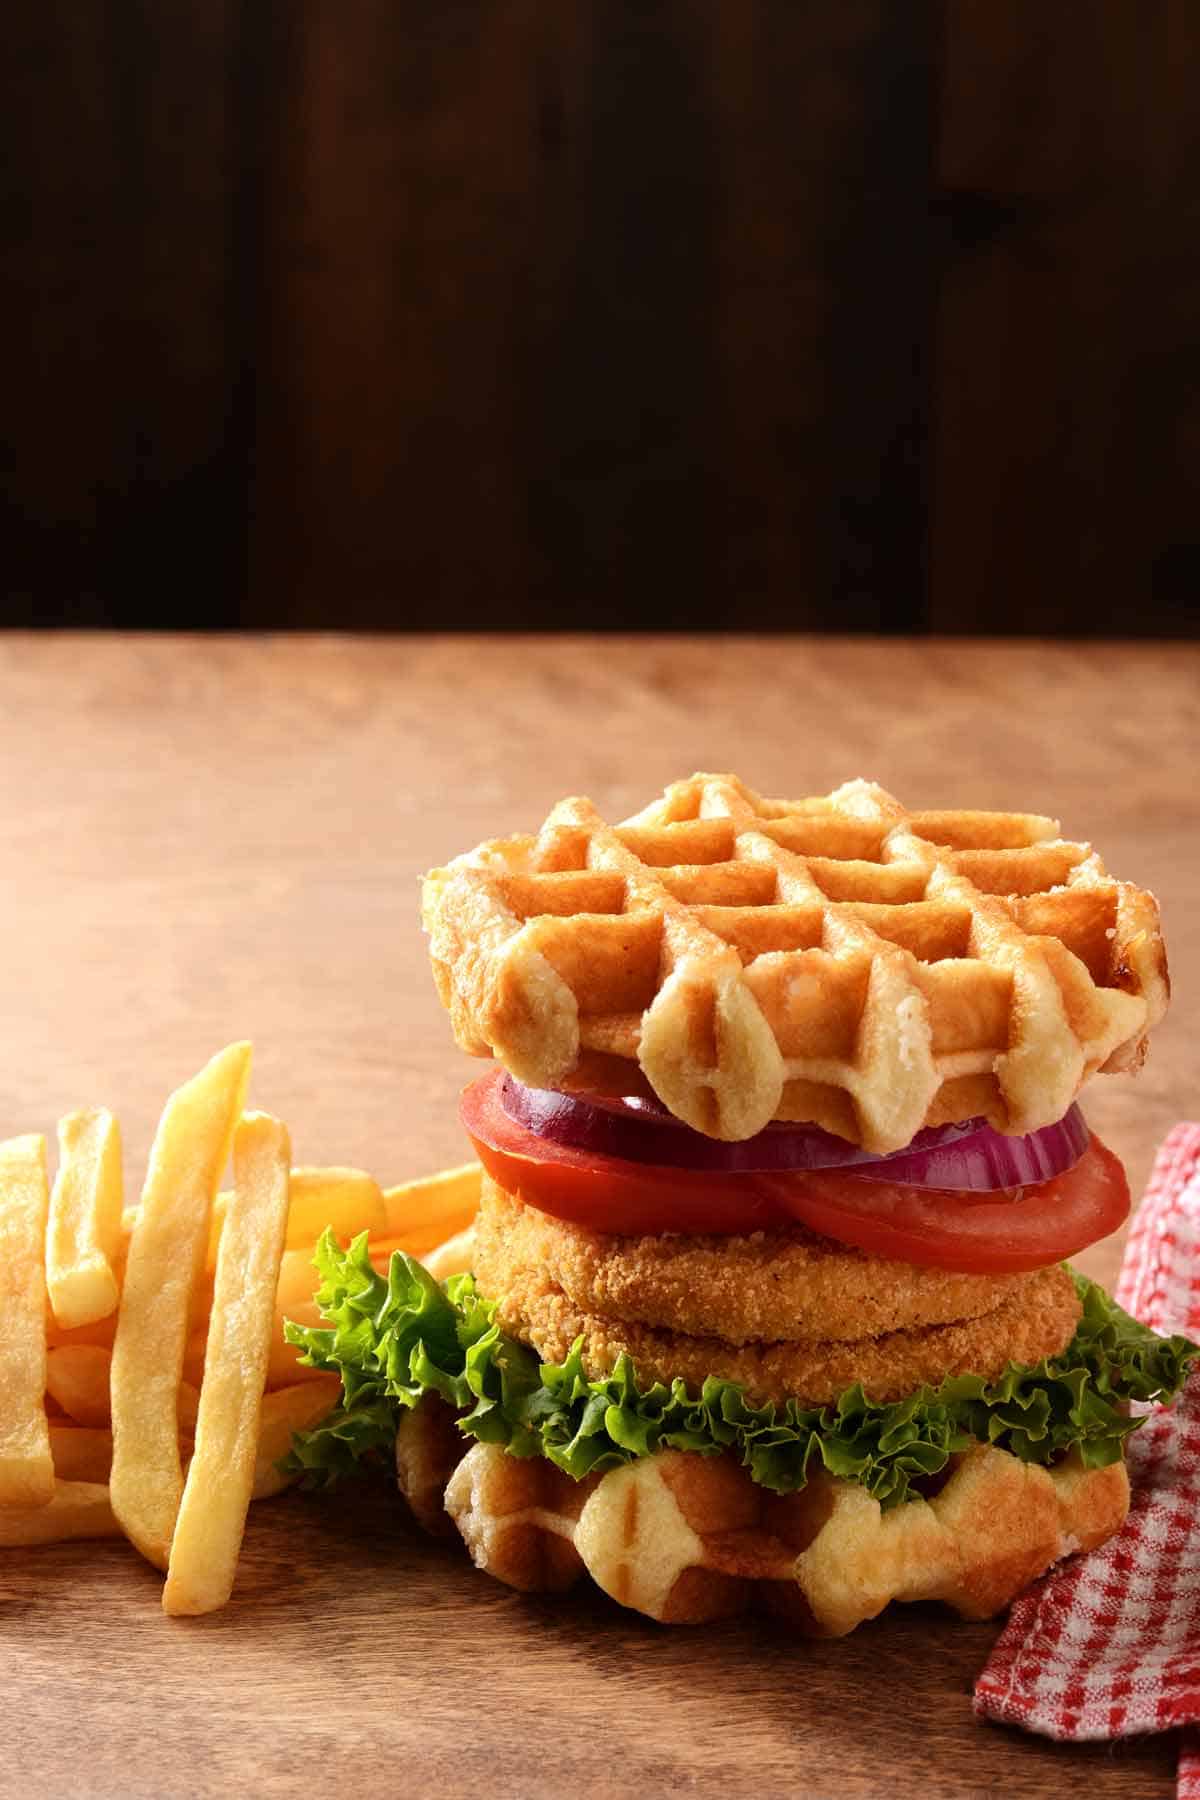 Chicken burger served on a waffle bun with a side of French fries.